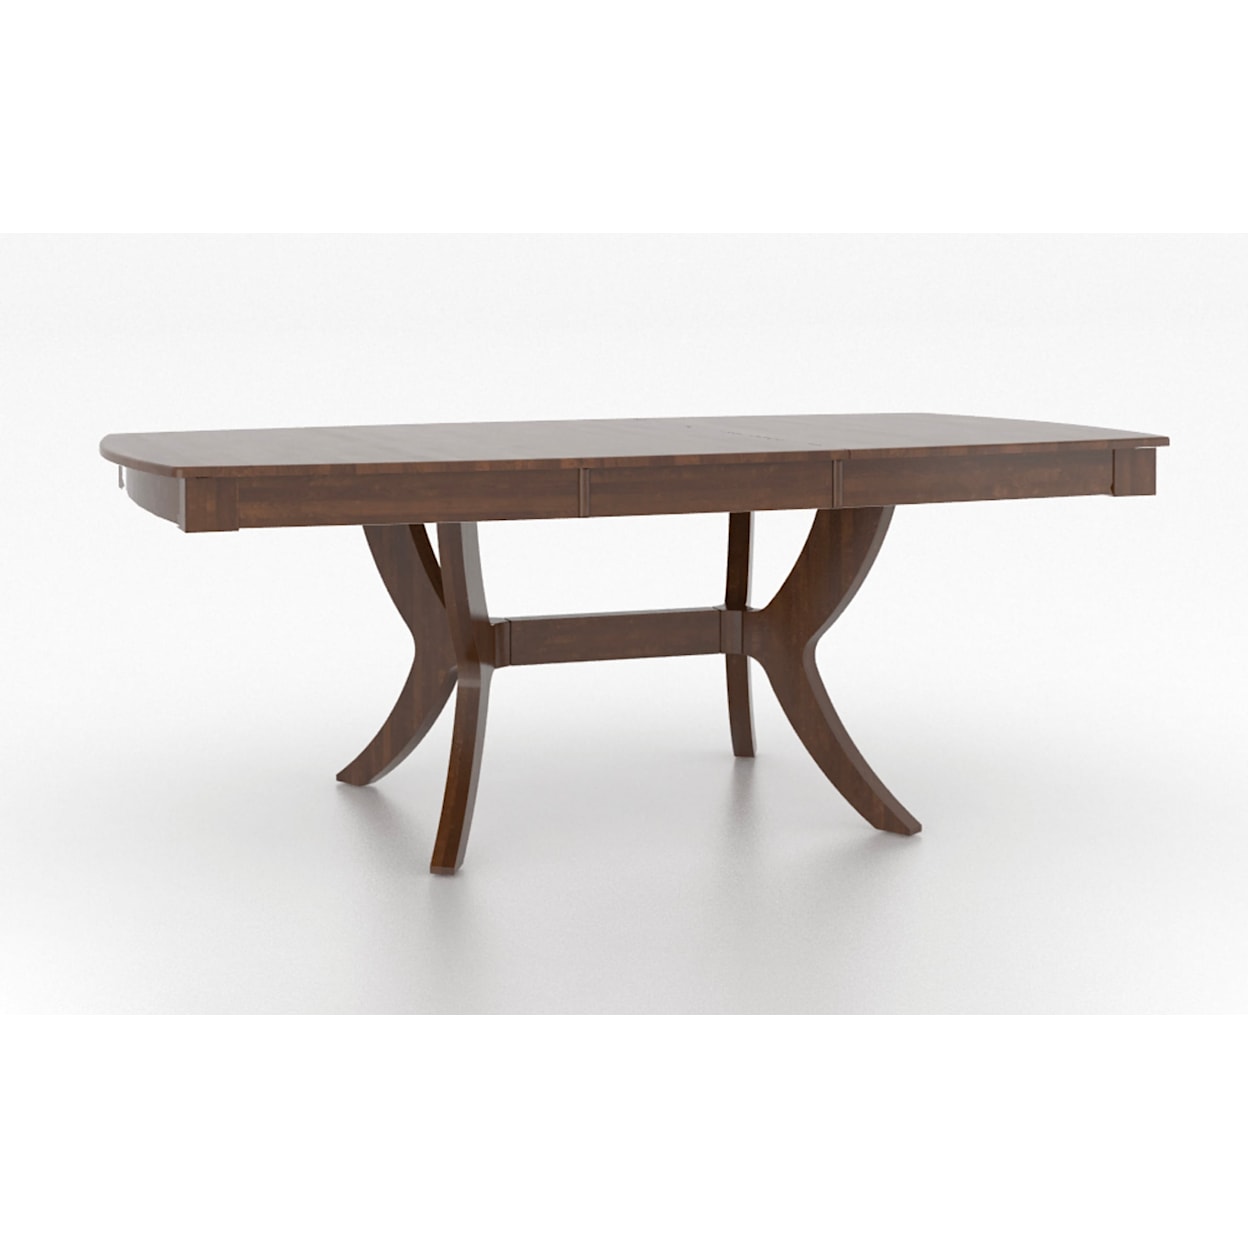 Canadel Canadel Boat Shaped Dining Table